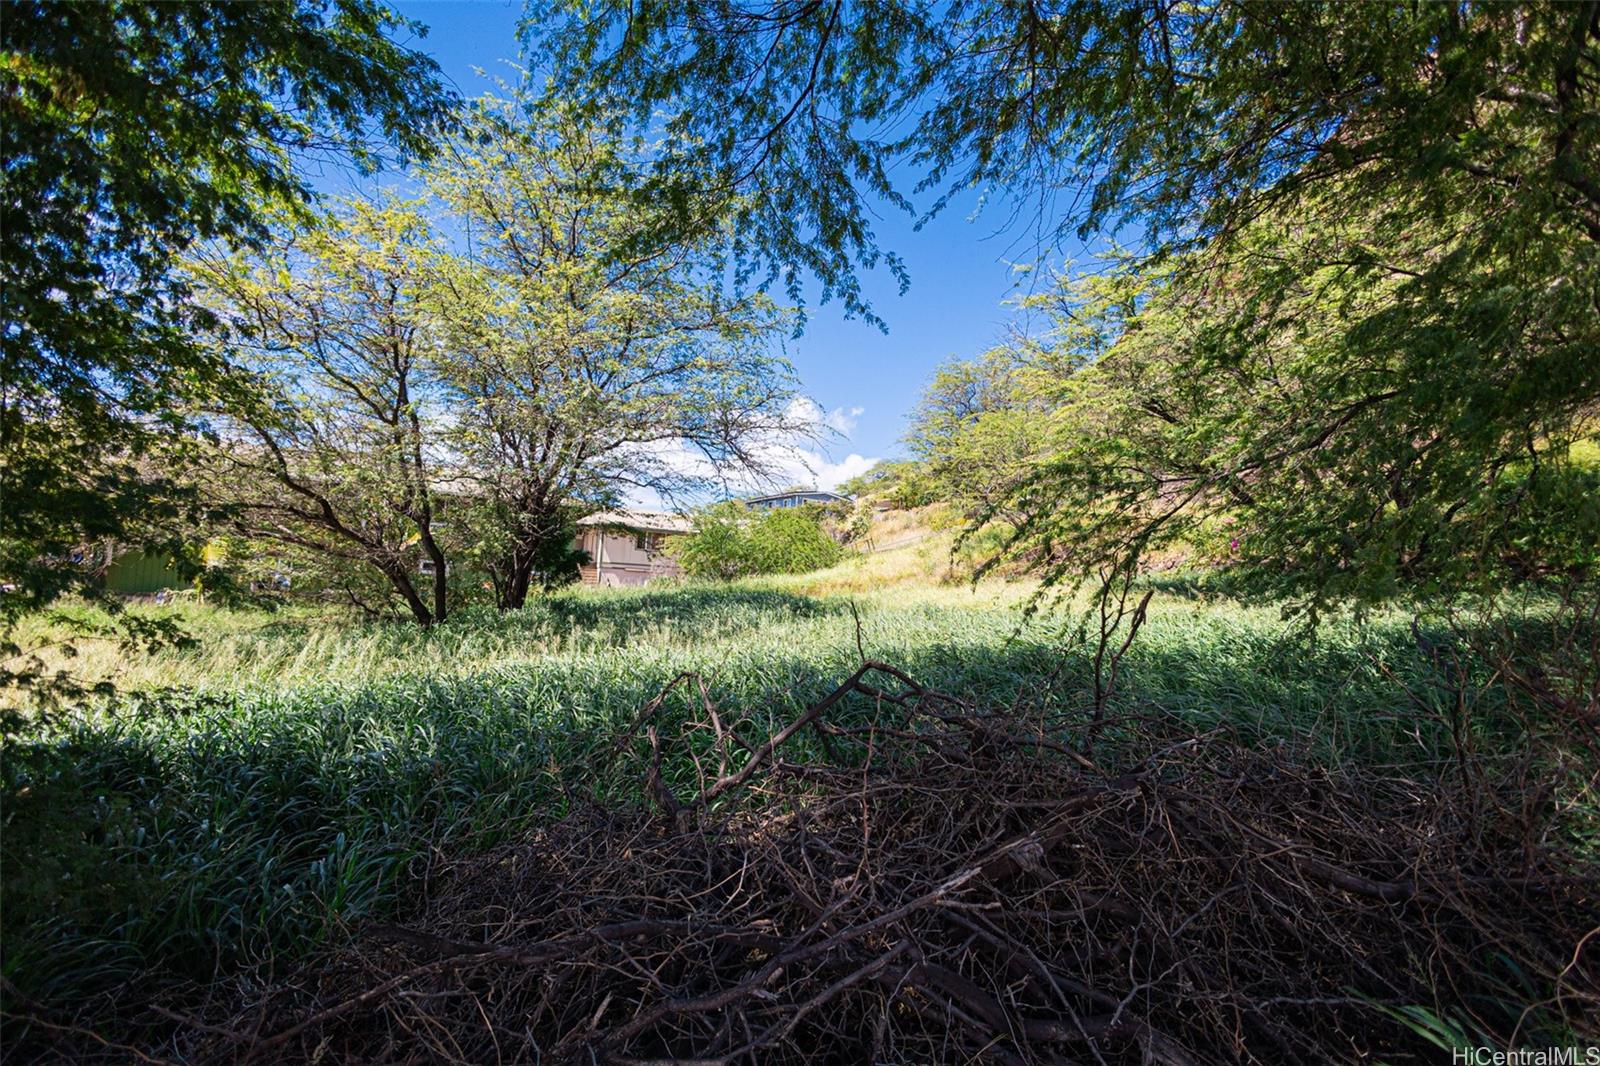 86-174 Mailiilii Rd  Waianae, Hi vacant land for sale - photo 16 of 22